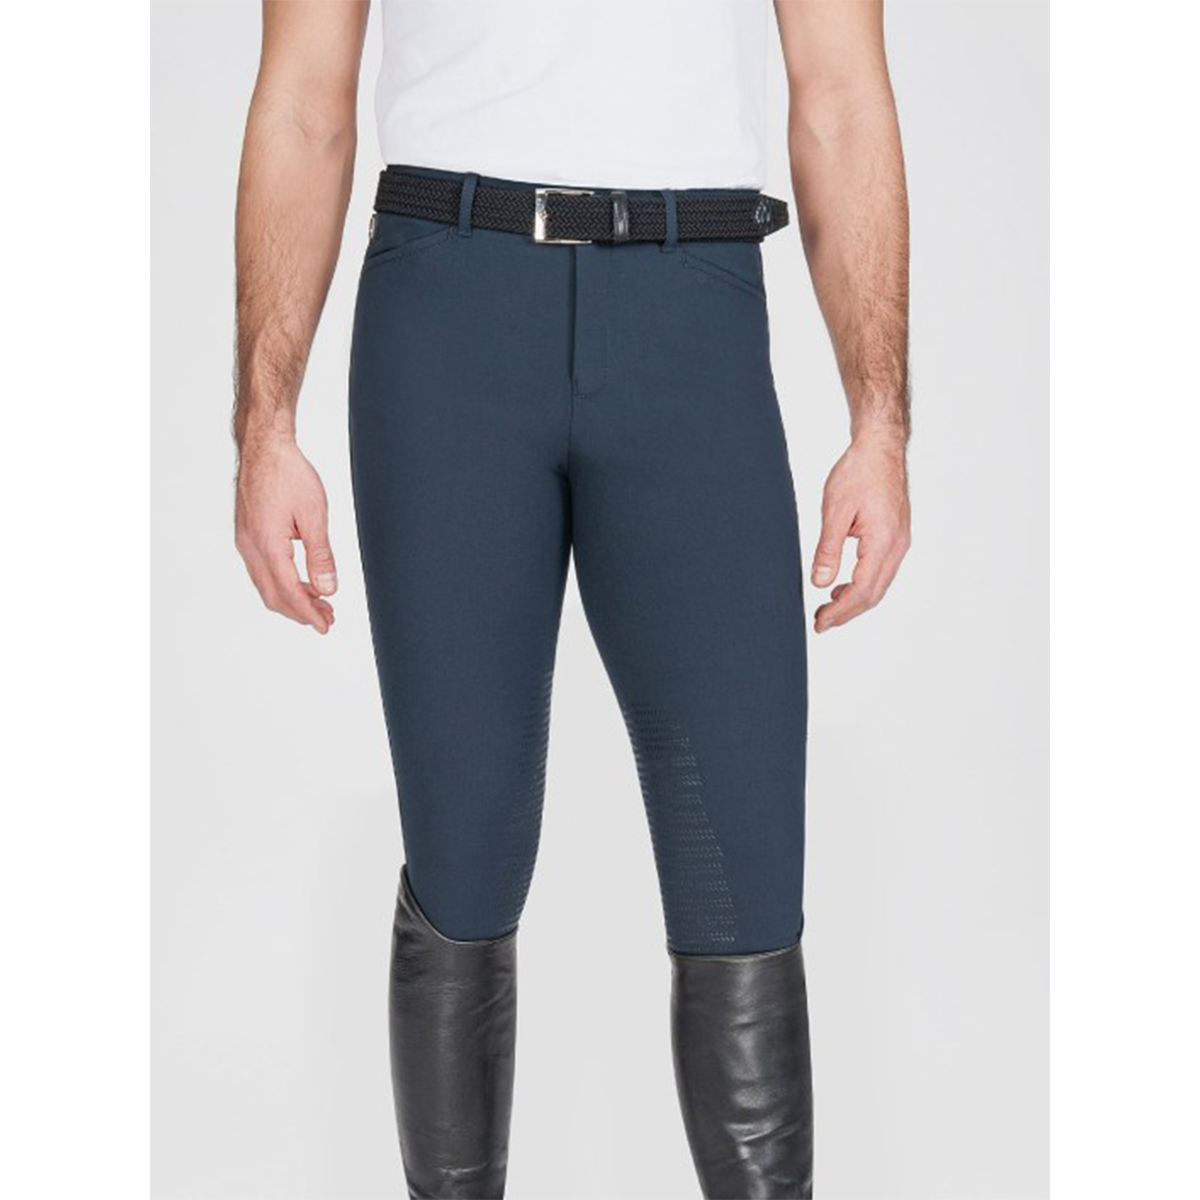 Equiline Men's Willow Knee Patch Breeches